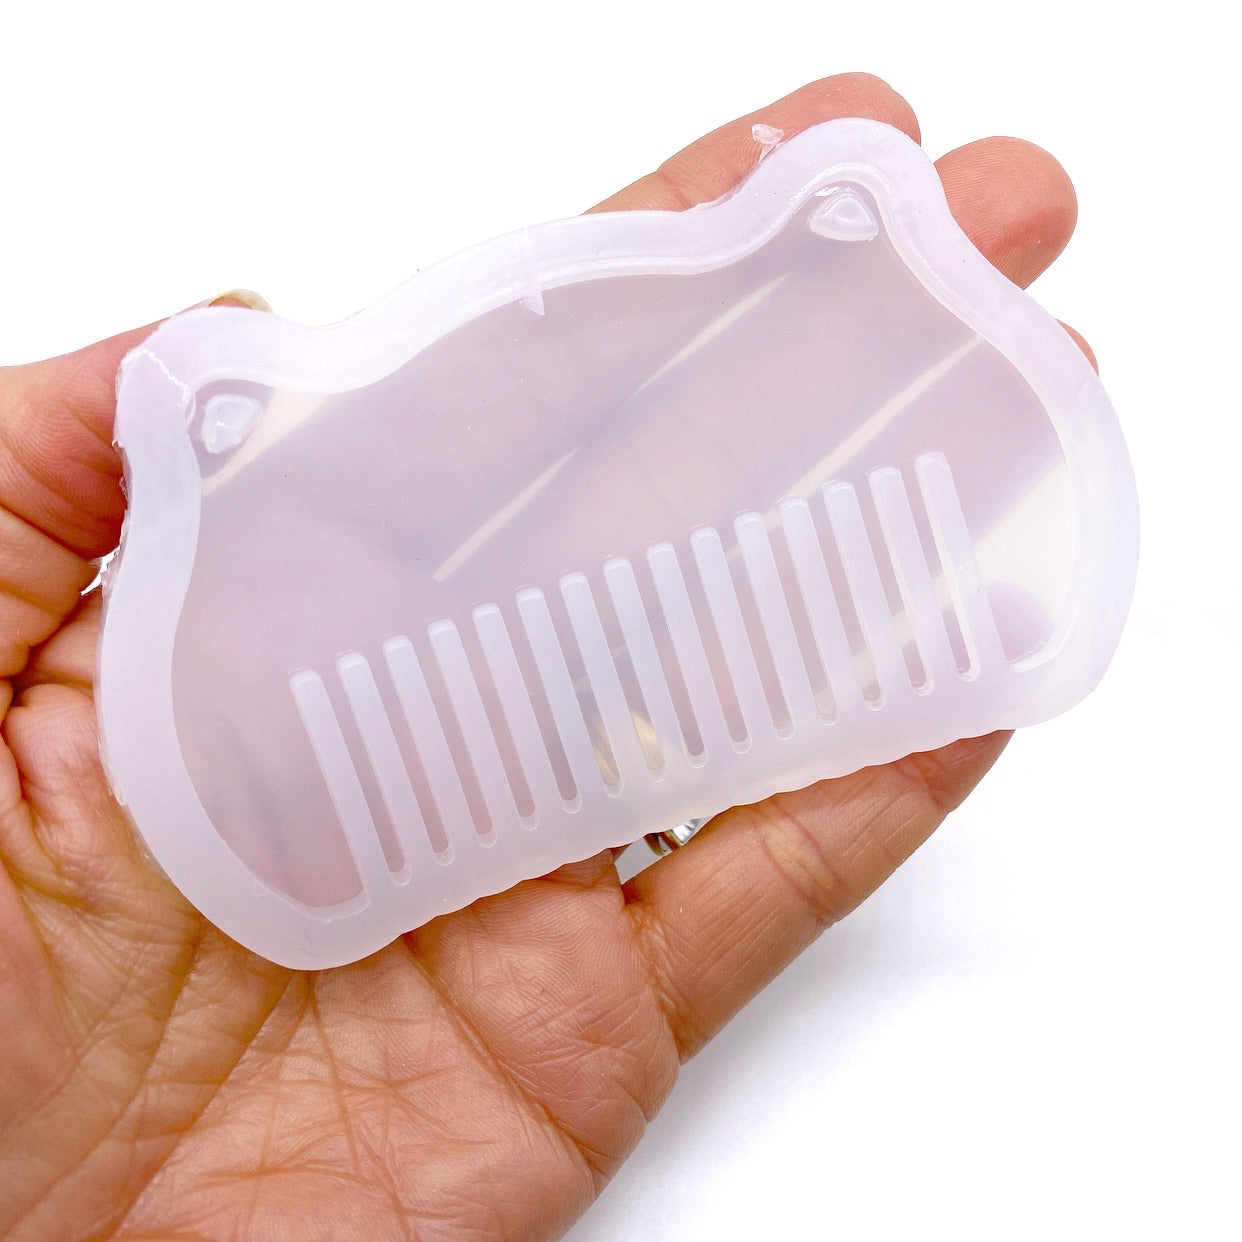 Cute Kitten Comb Accessory Moulds